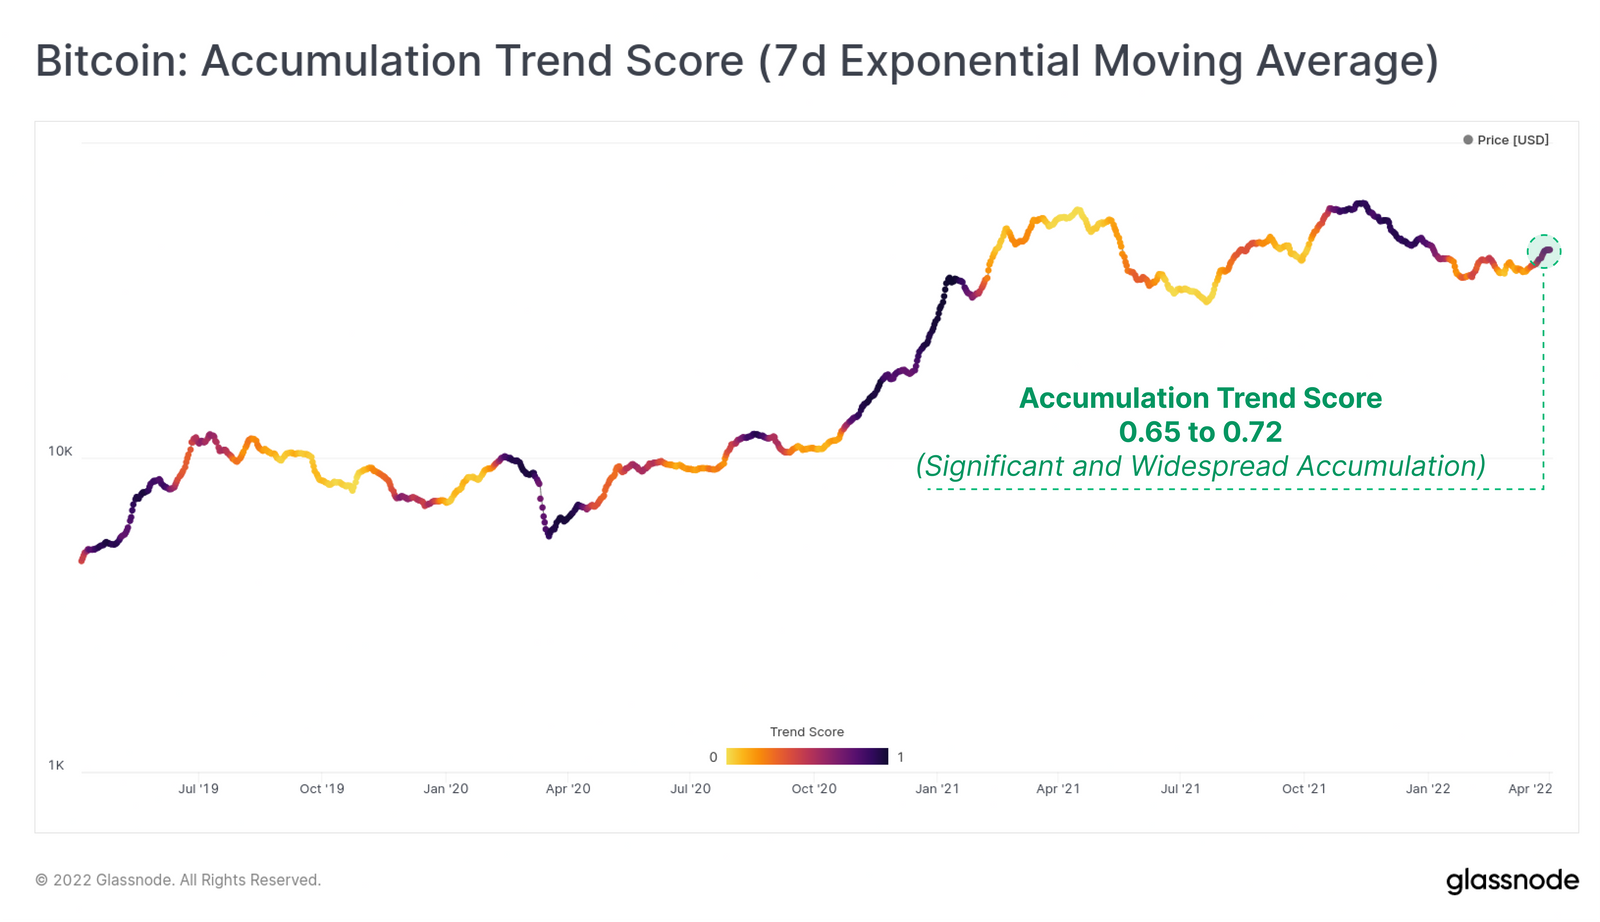 Bitcoin: Accumulation Trend Score (7d Exponential Moving Average)